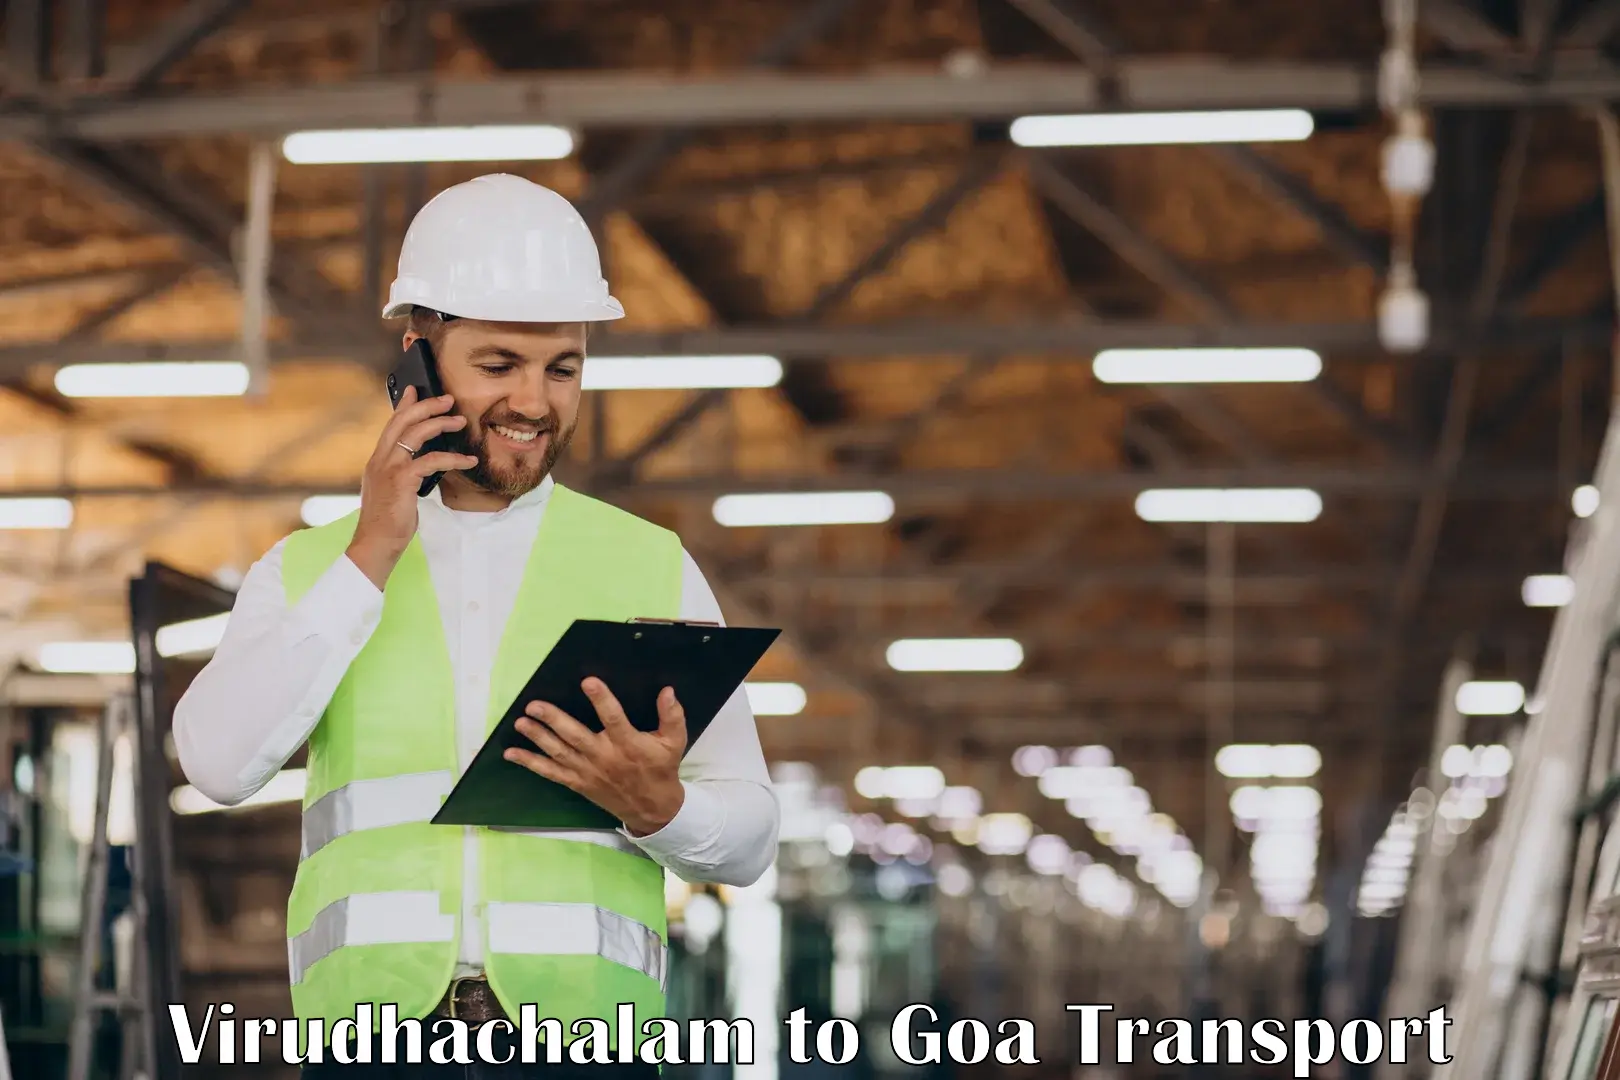 Delivery service Virudhachalam to Goa